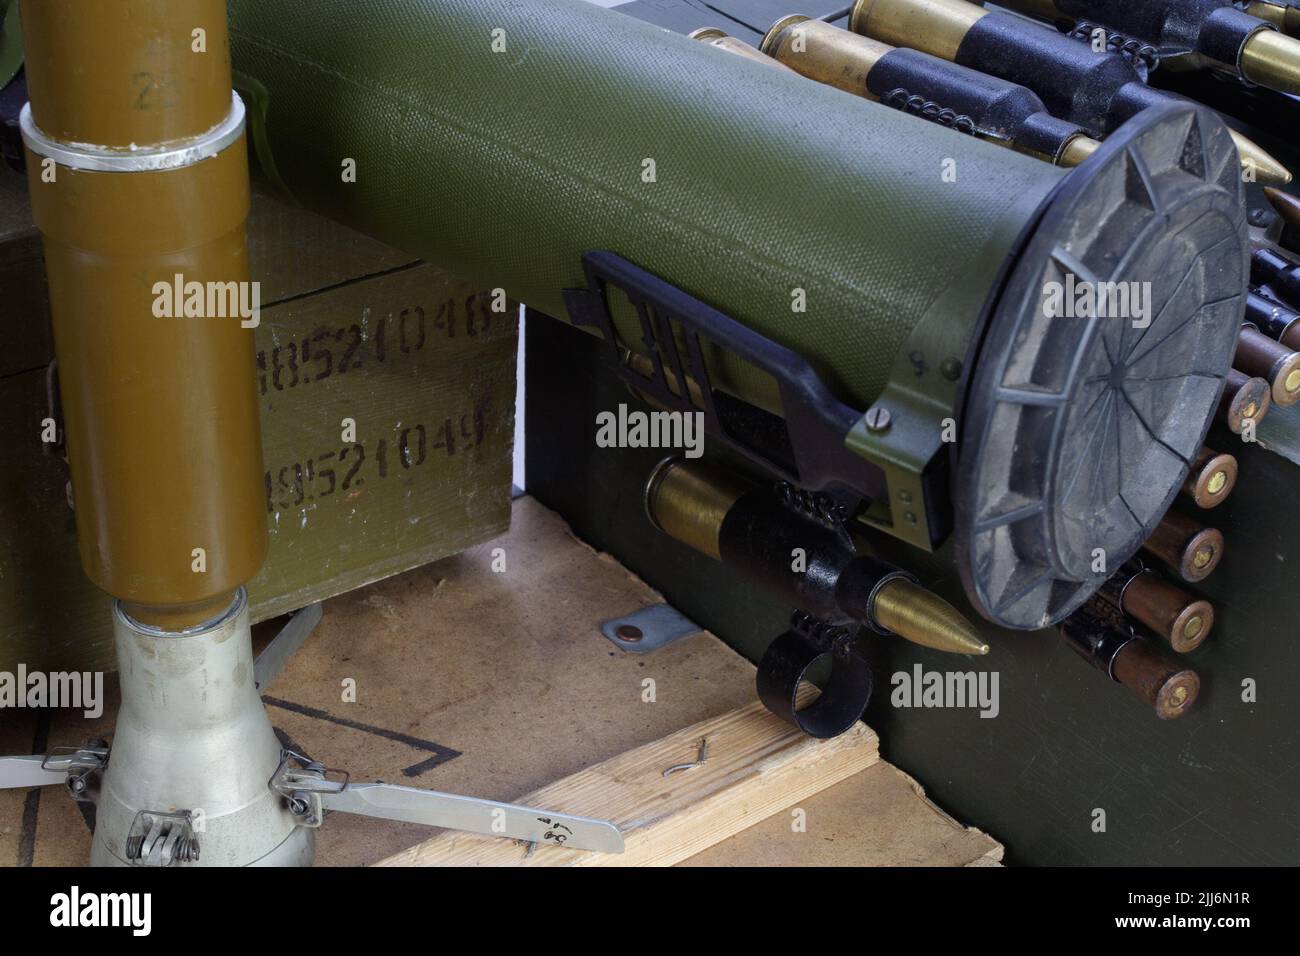 army crate of ammunition with ammunition Stock Photo